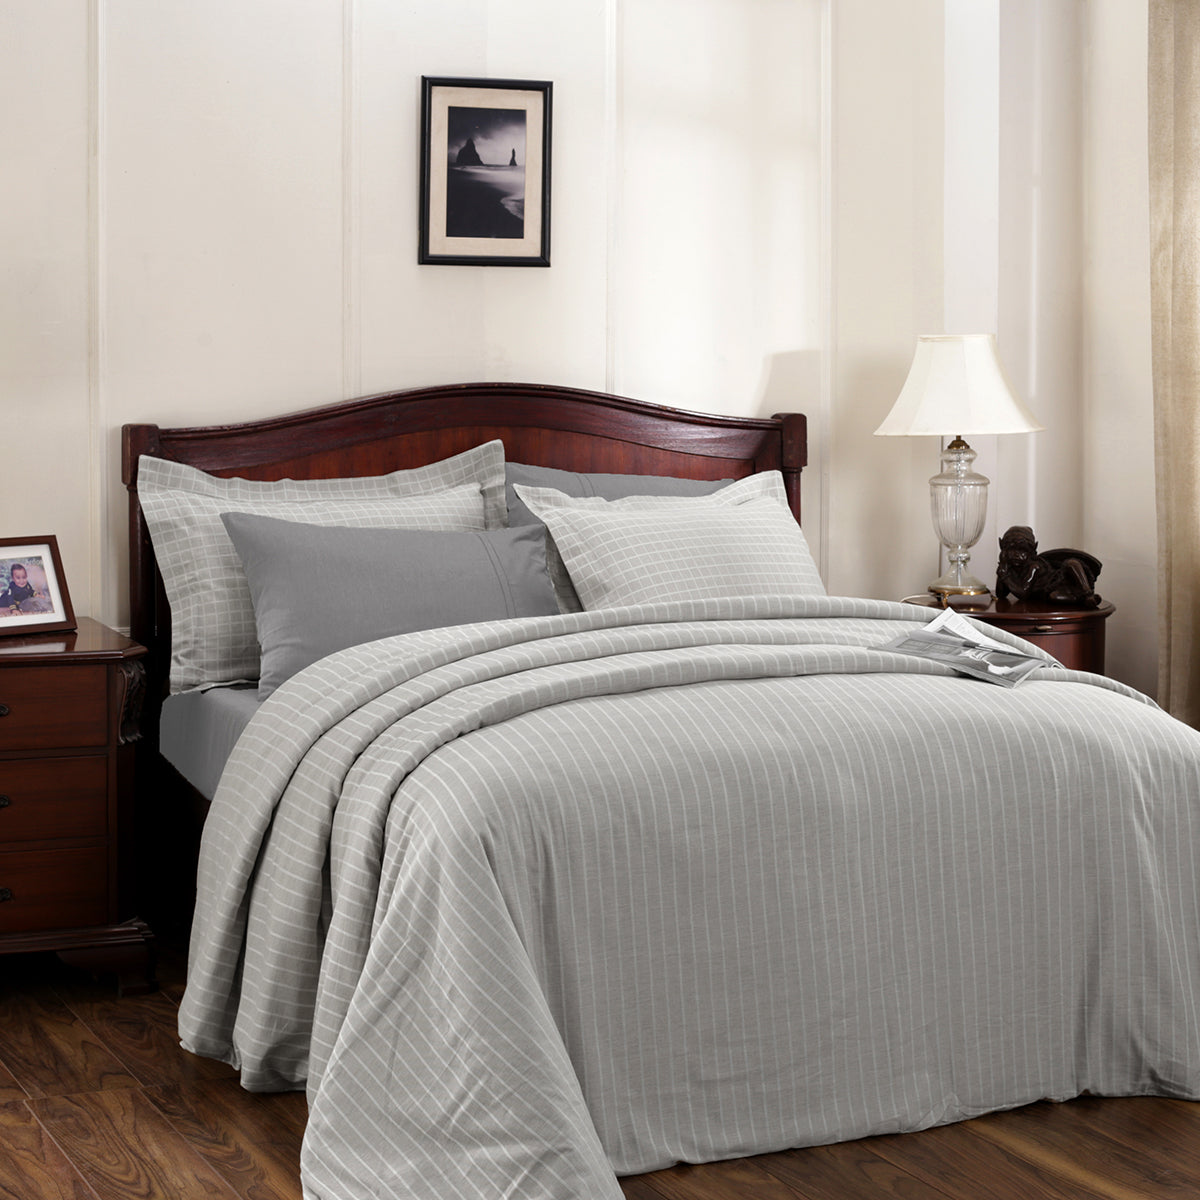 Bliss Reversible Made With Egyptian Cotton Ultra Soft Grey Duvet Cover with Pillow Case